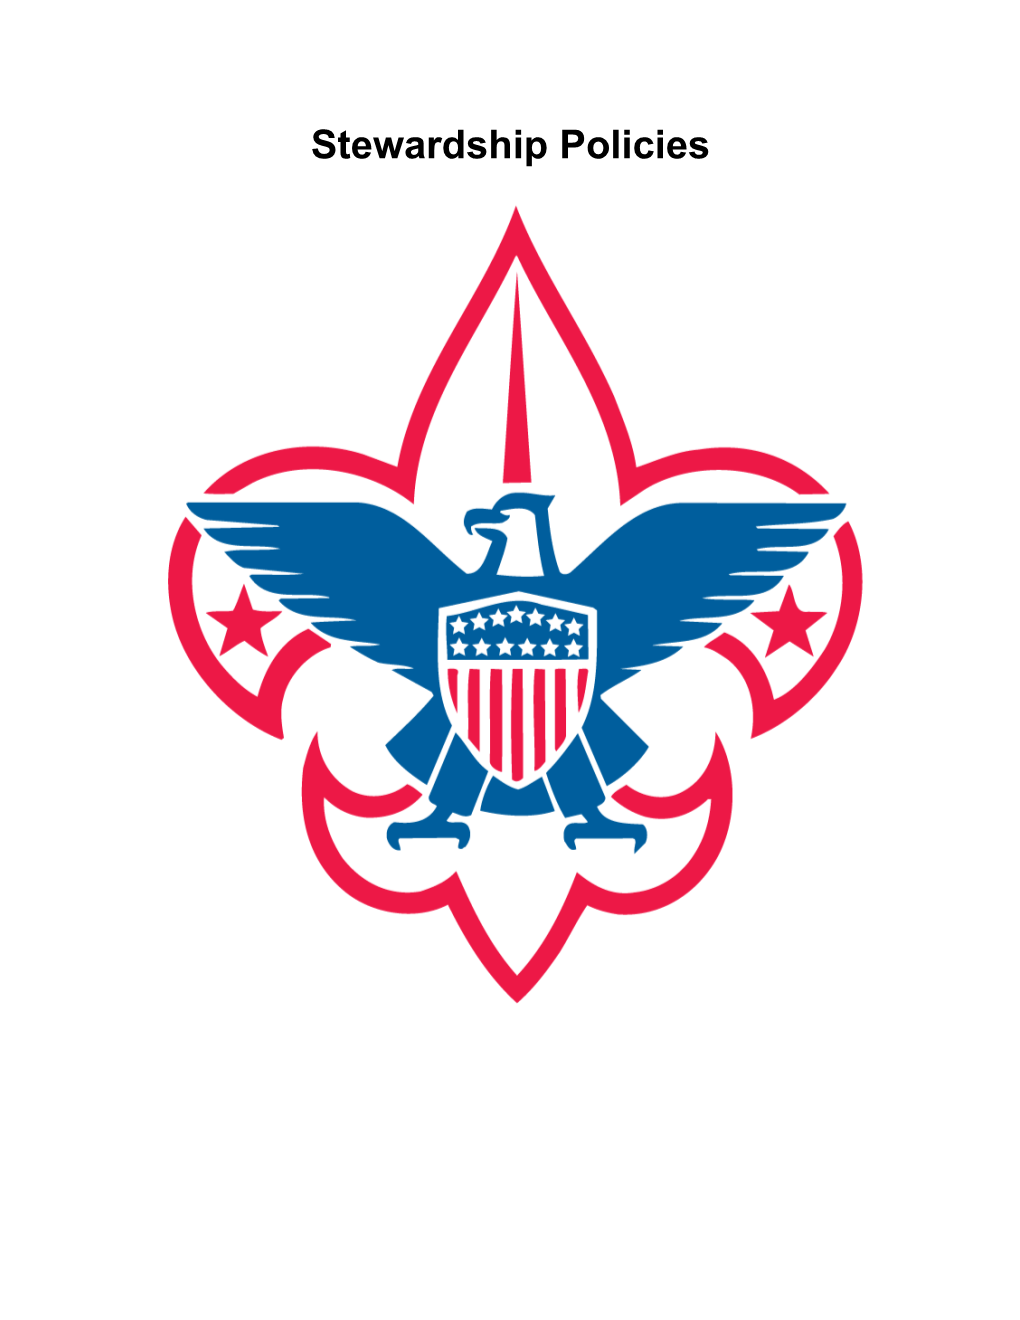 (Council Name Here) Council Policy Boy Scouts of America